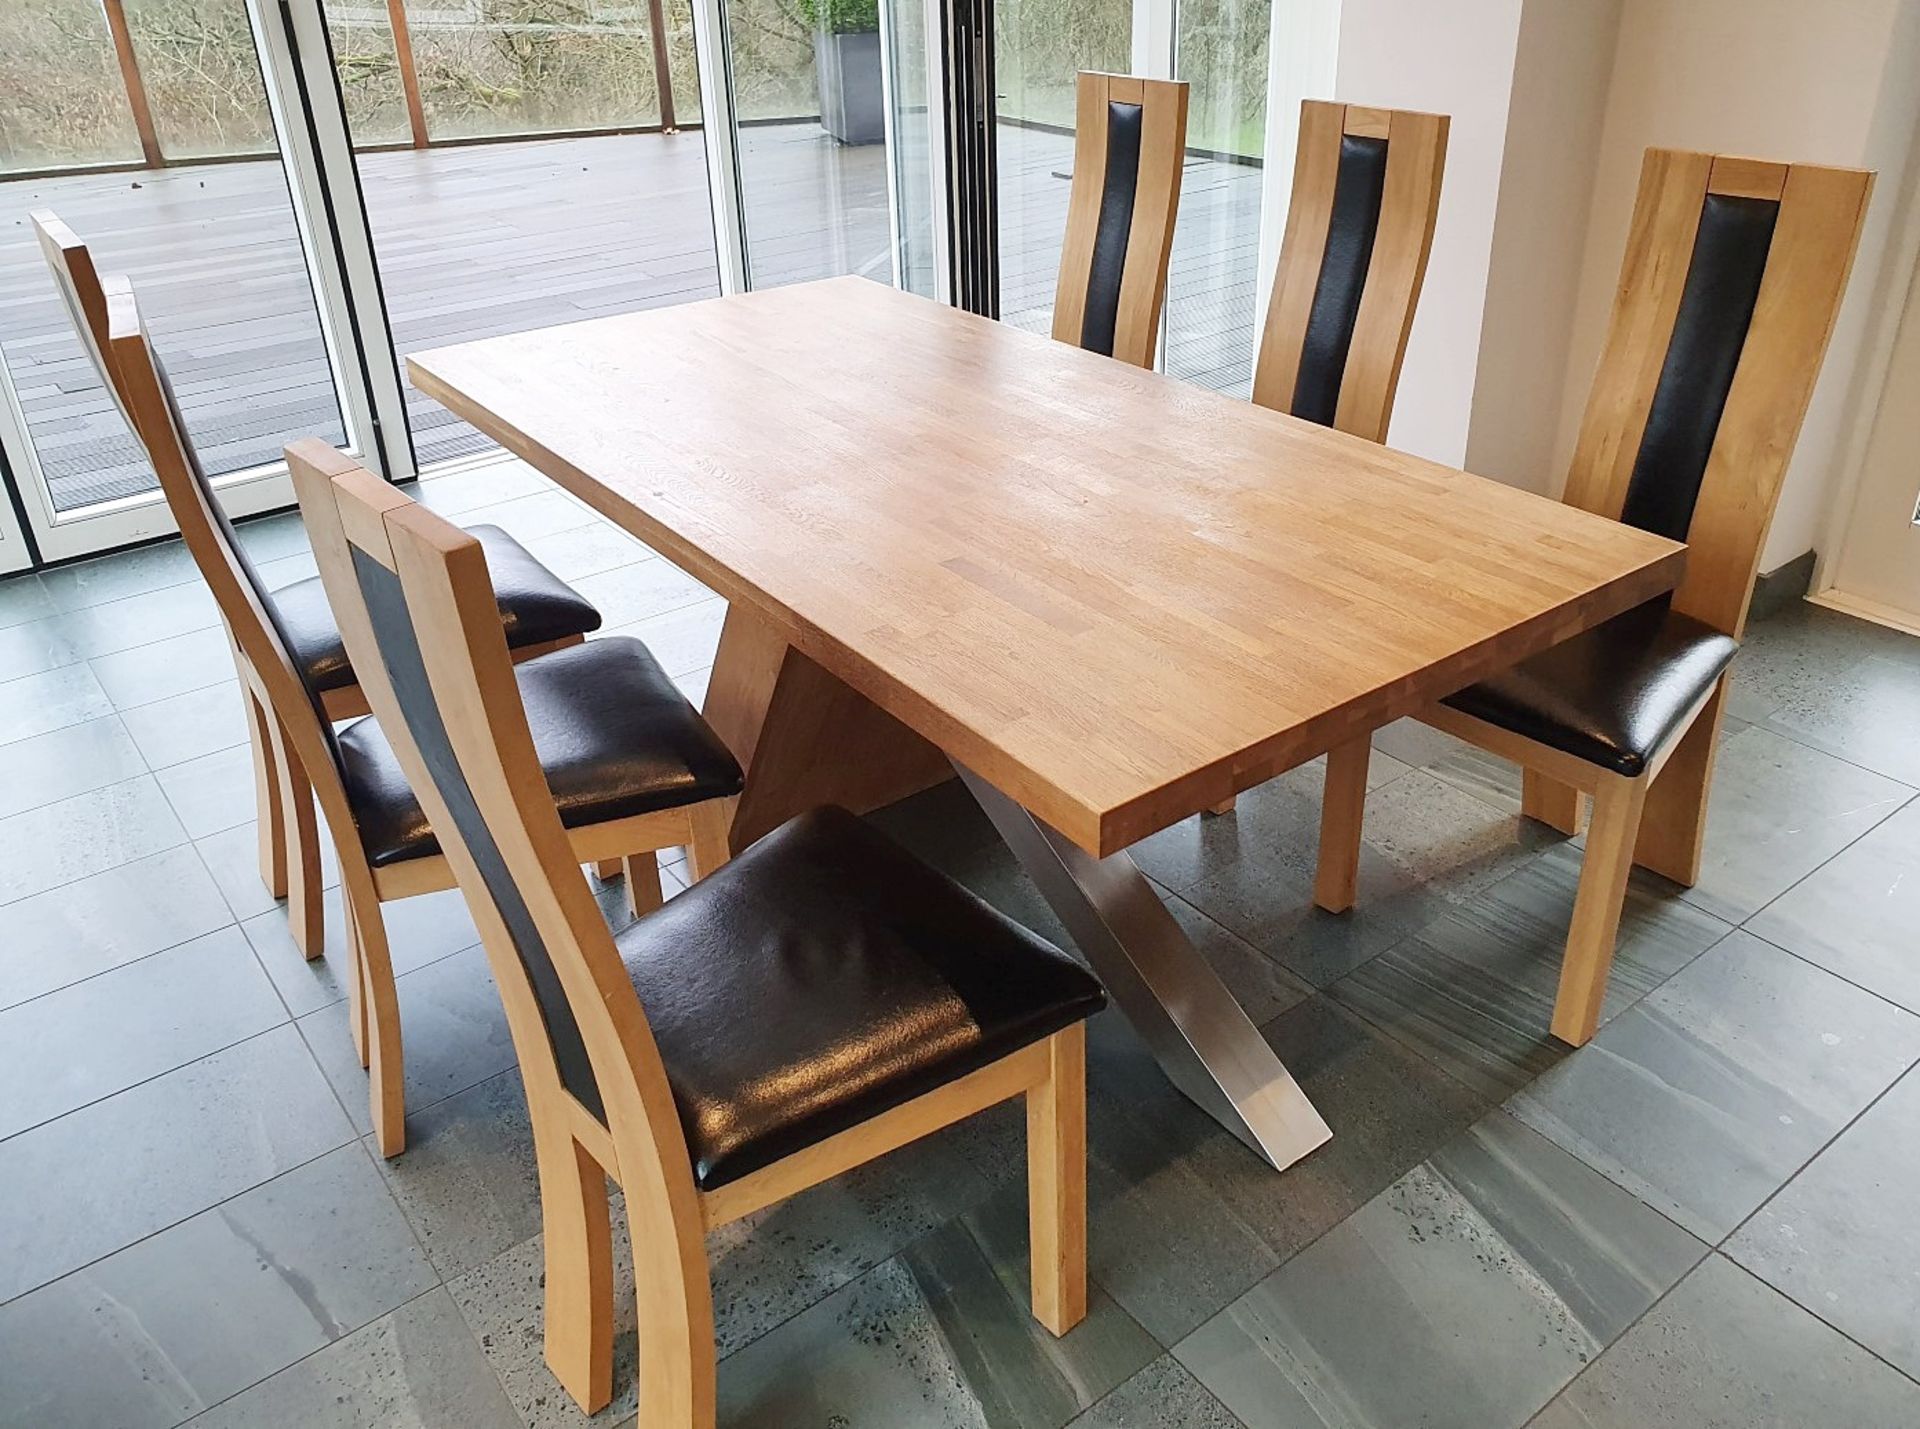 1 x Solid Oak 1.8 Metre Dining Table With 6 x High Back Dining Chairs - Pre-owned In Great Condition - Image 9 of 12